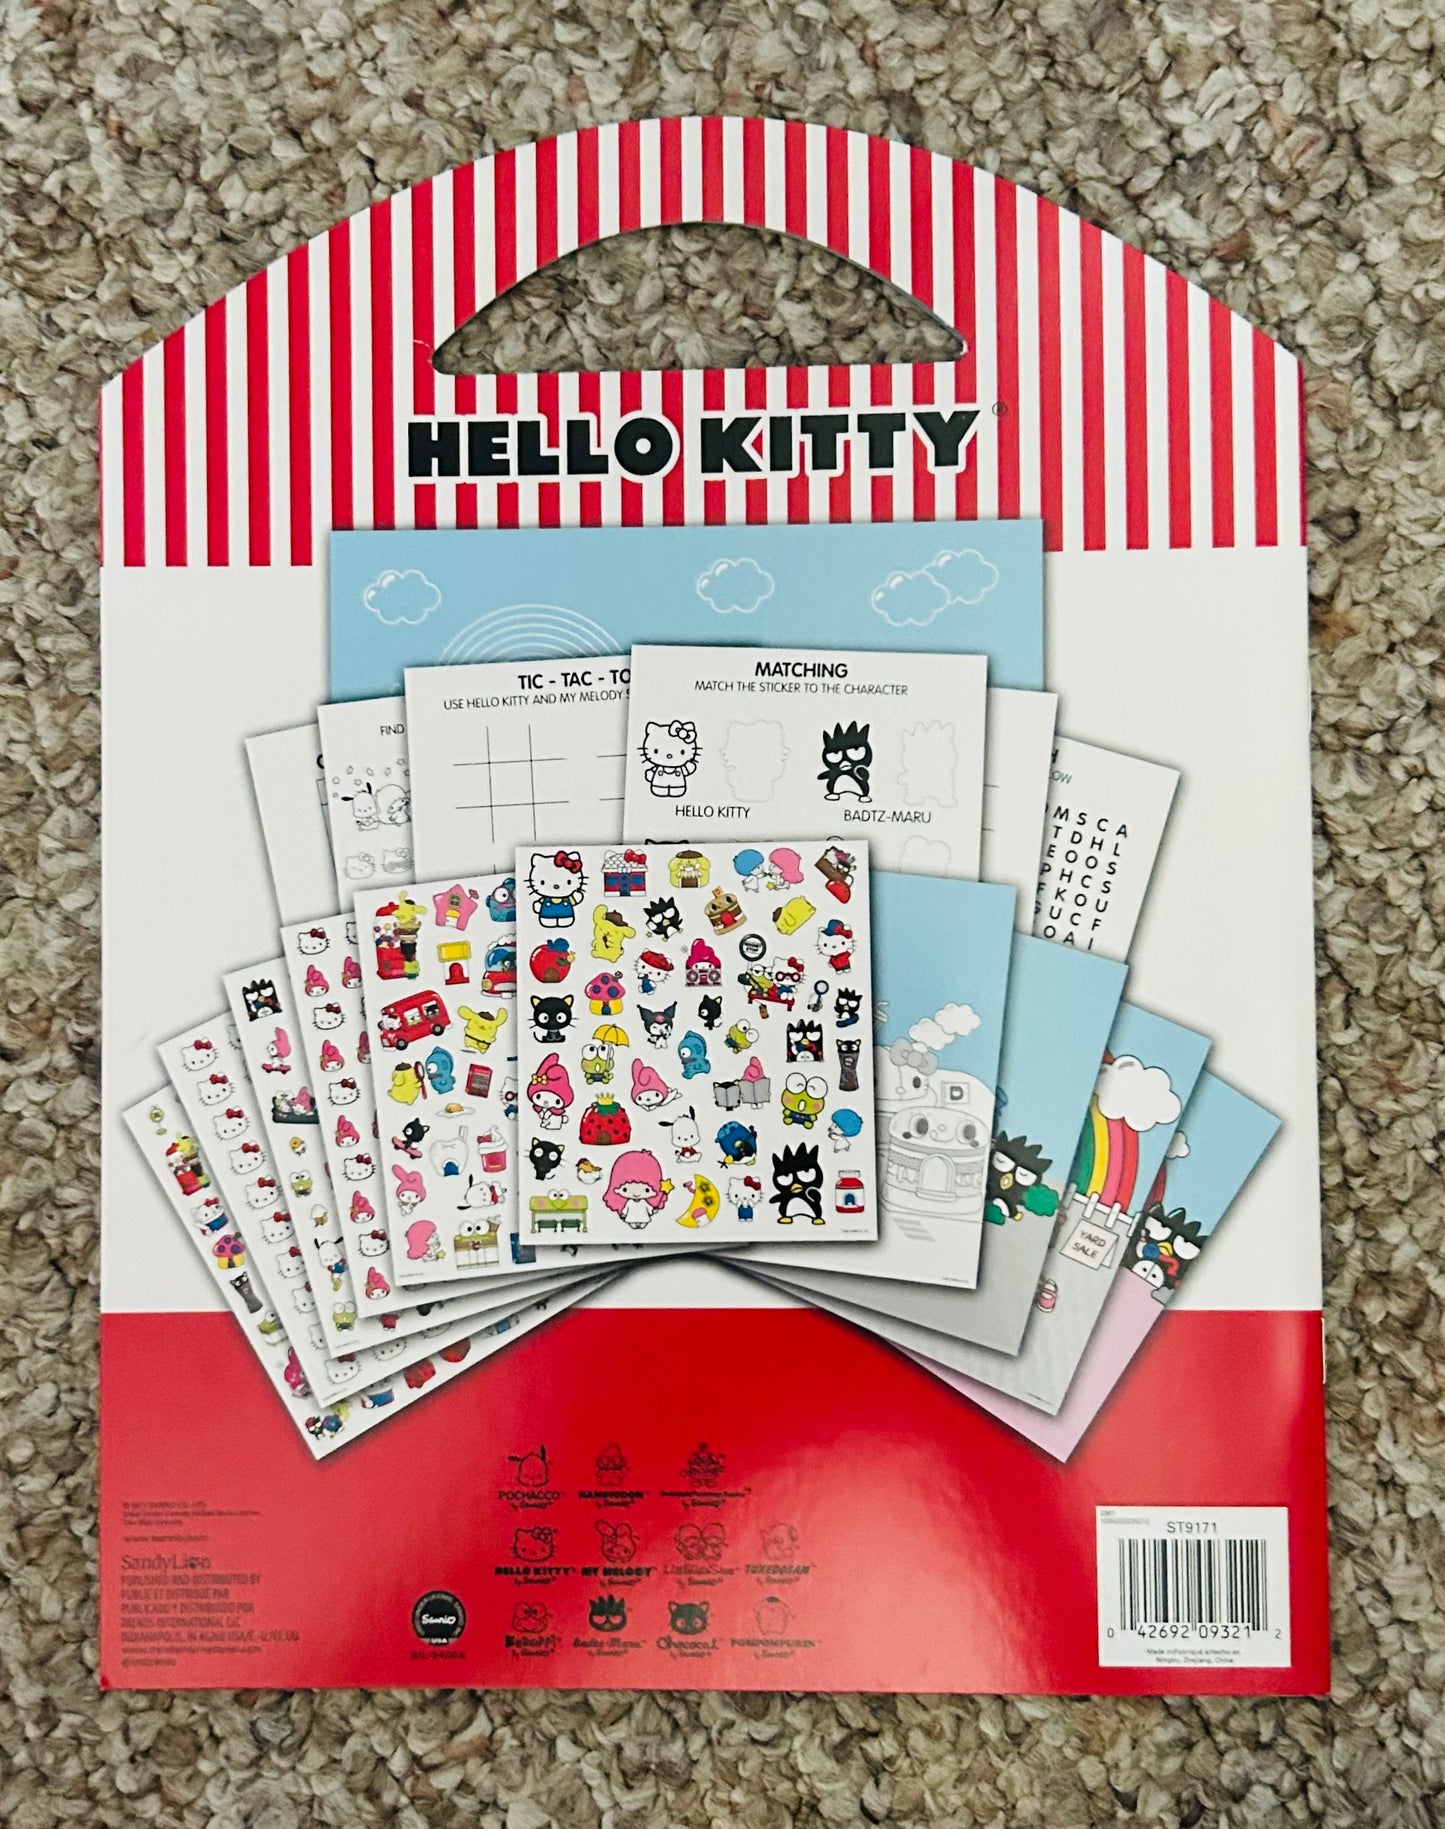 Hello Kitty Sticker Activity Set for Kids - Hello Kitty Grab and Go Bundle with Over 300 Hello Kitty Stickers and Activity Pages, Bookmark (Hello Kitty Gifts)